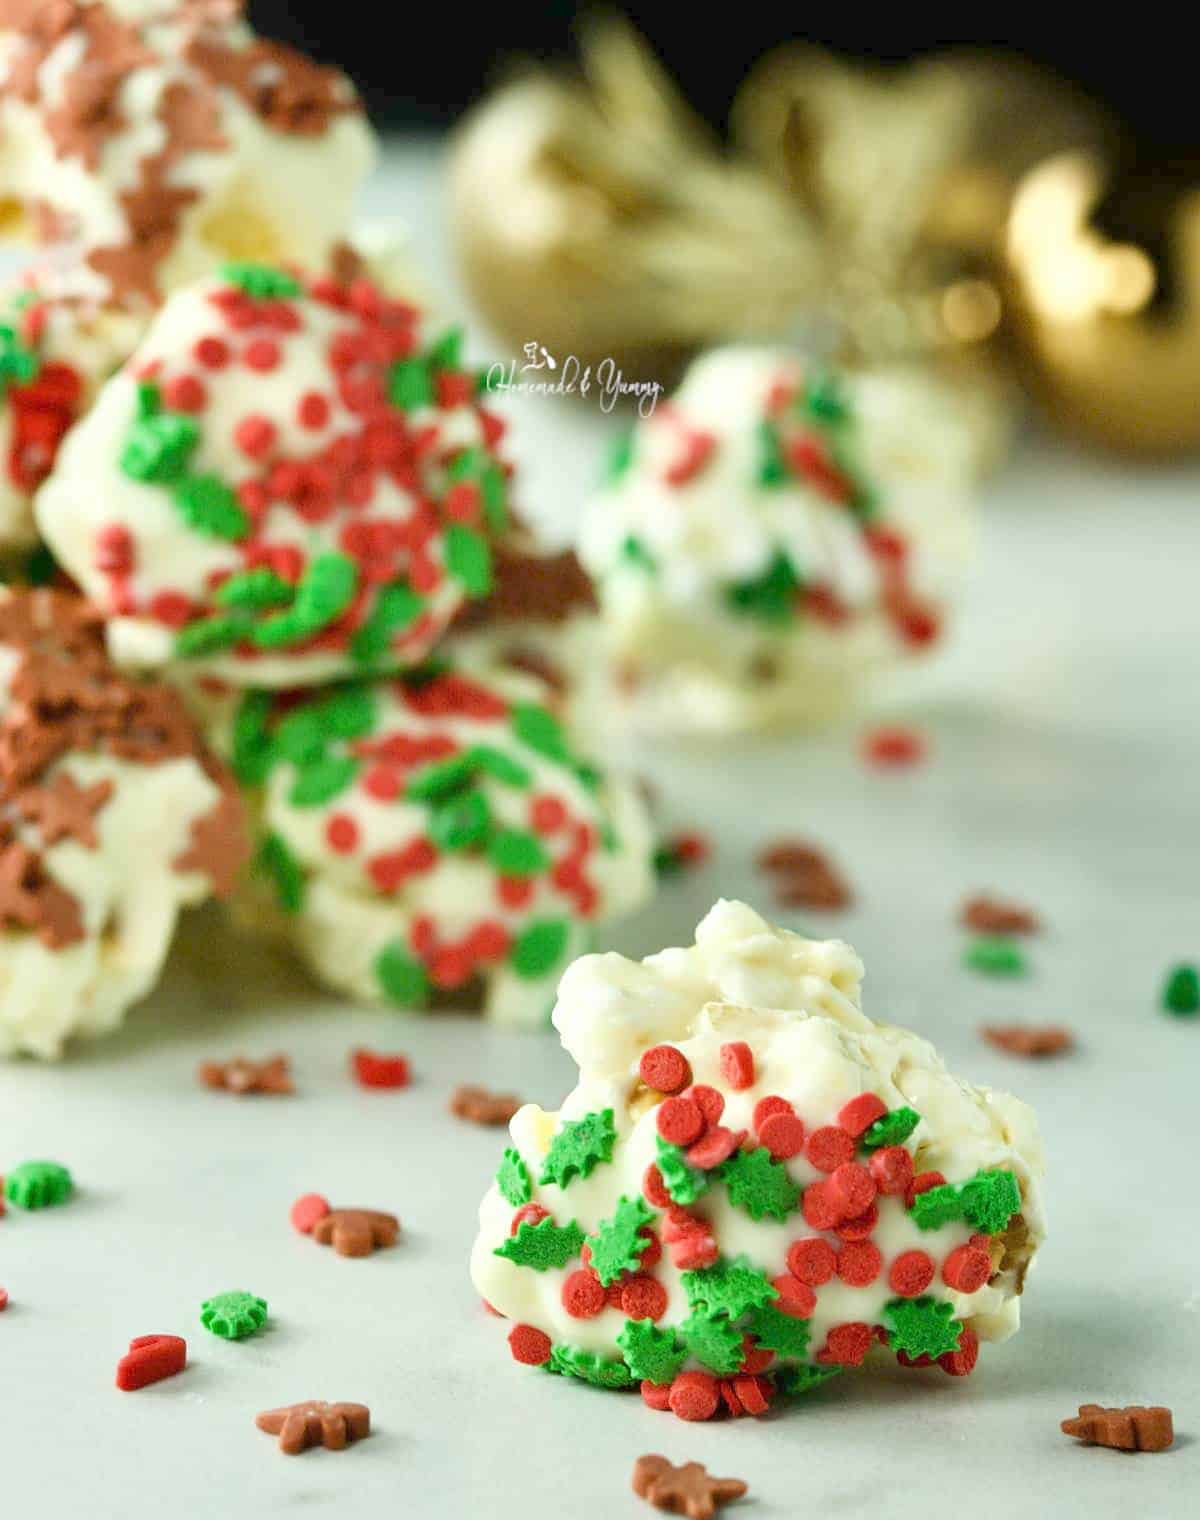 Mini holiday popcorn ball with white chocolate and festive sprinkles.